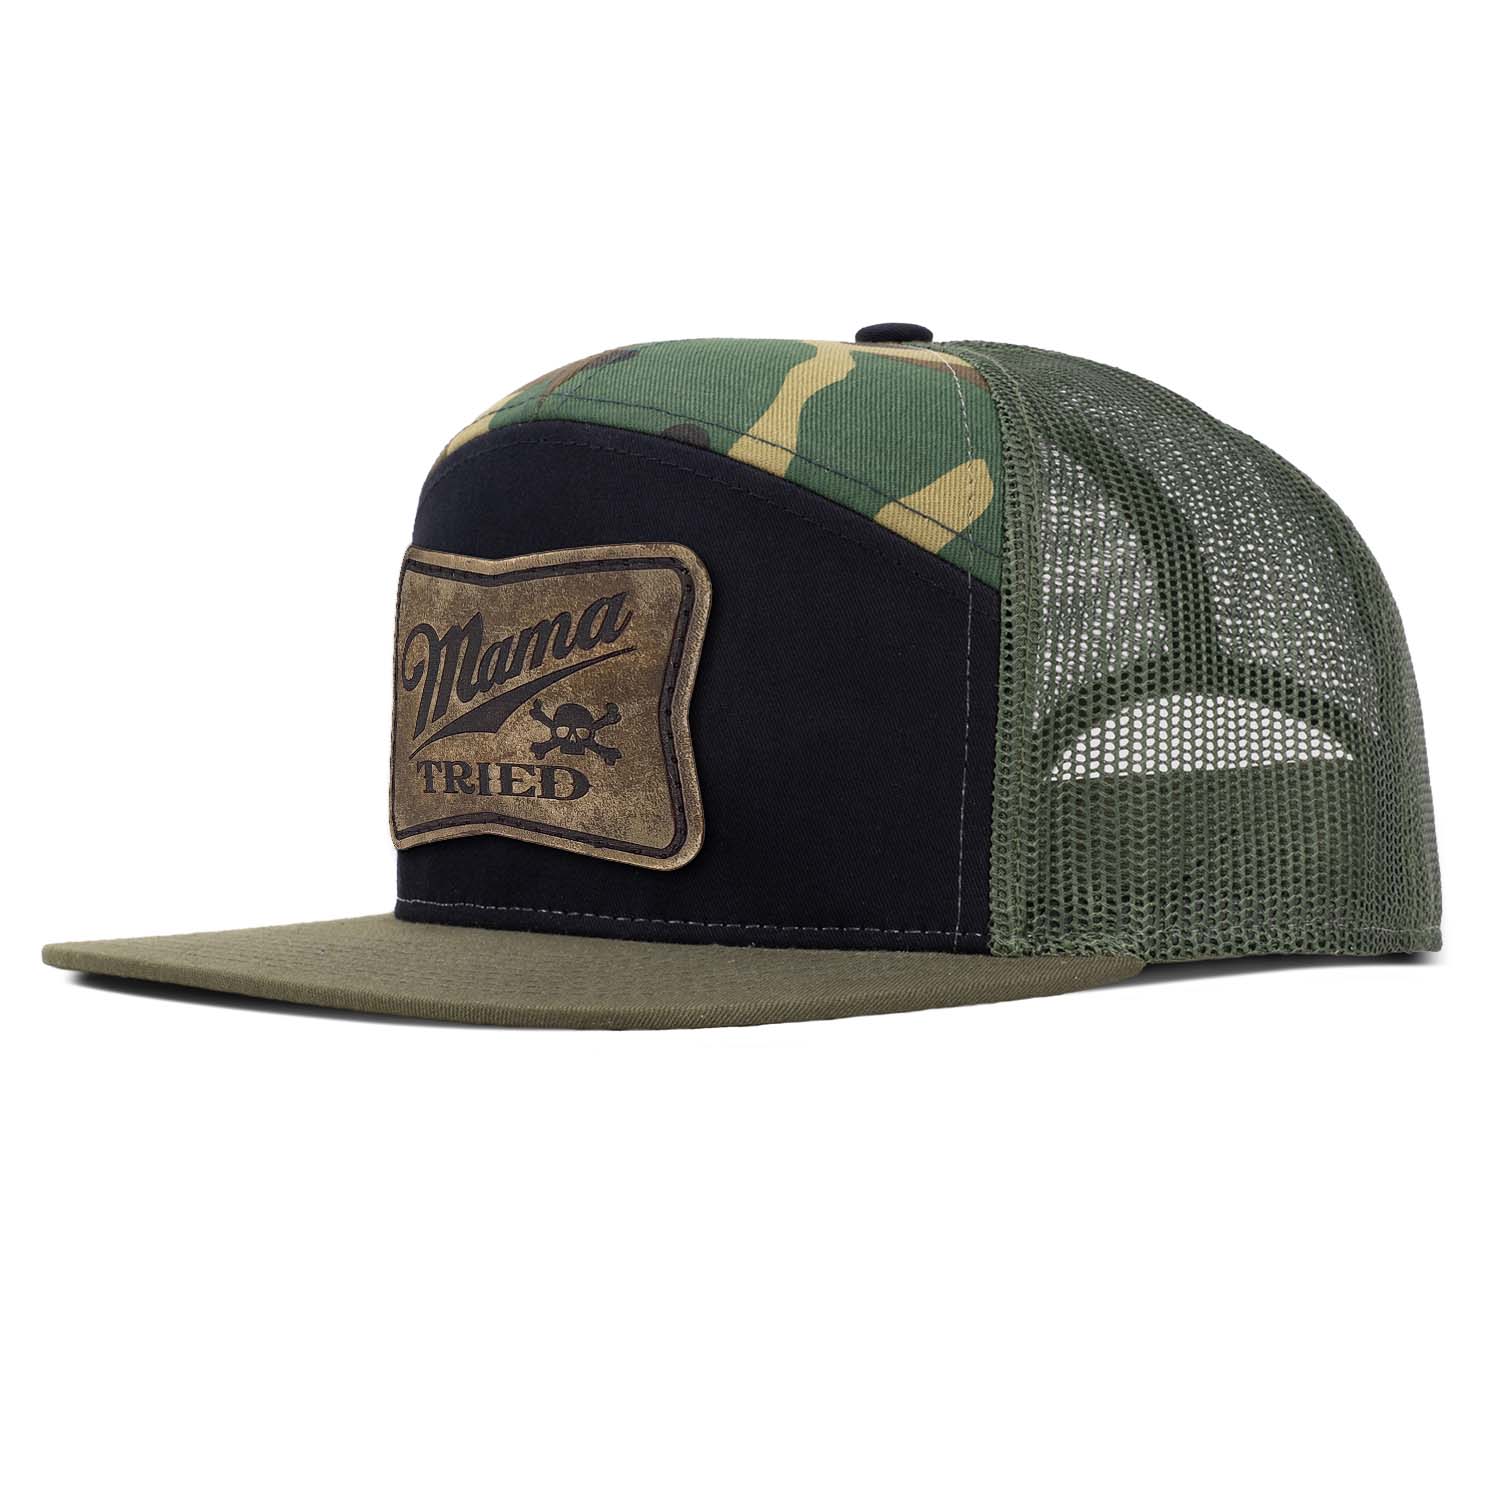 A loden, black, and woodland camo 7 panel trucker hat with loden mesh featuring our full grain leather vintage finish Mama Tried patch stitched on the seamless front panel